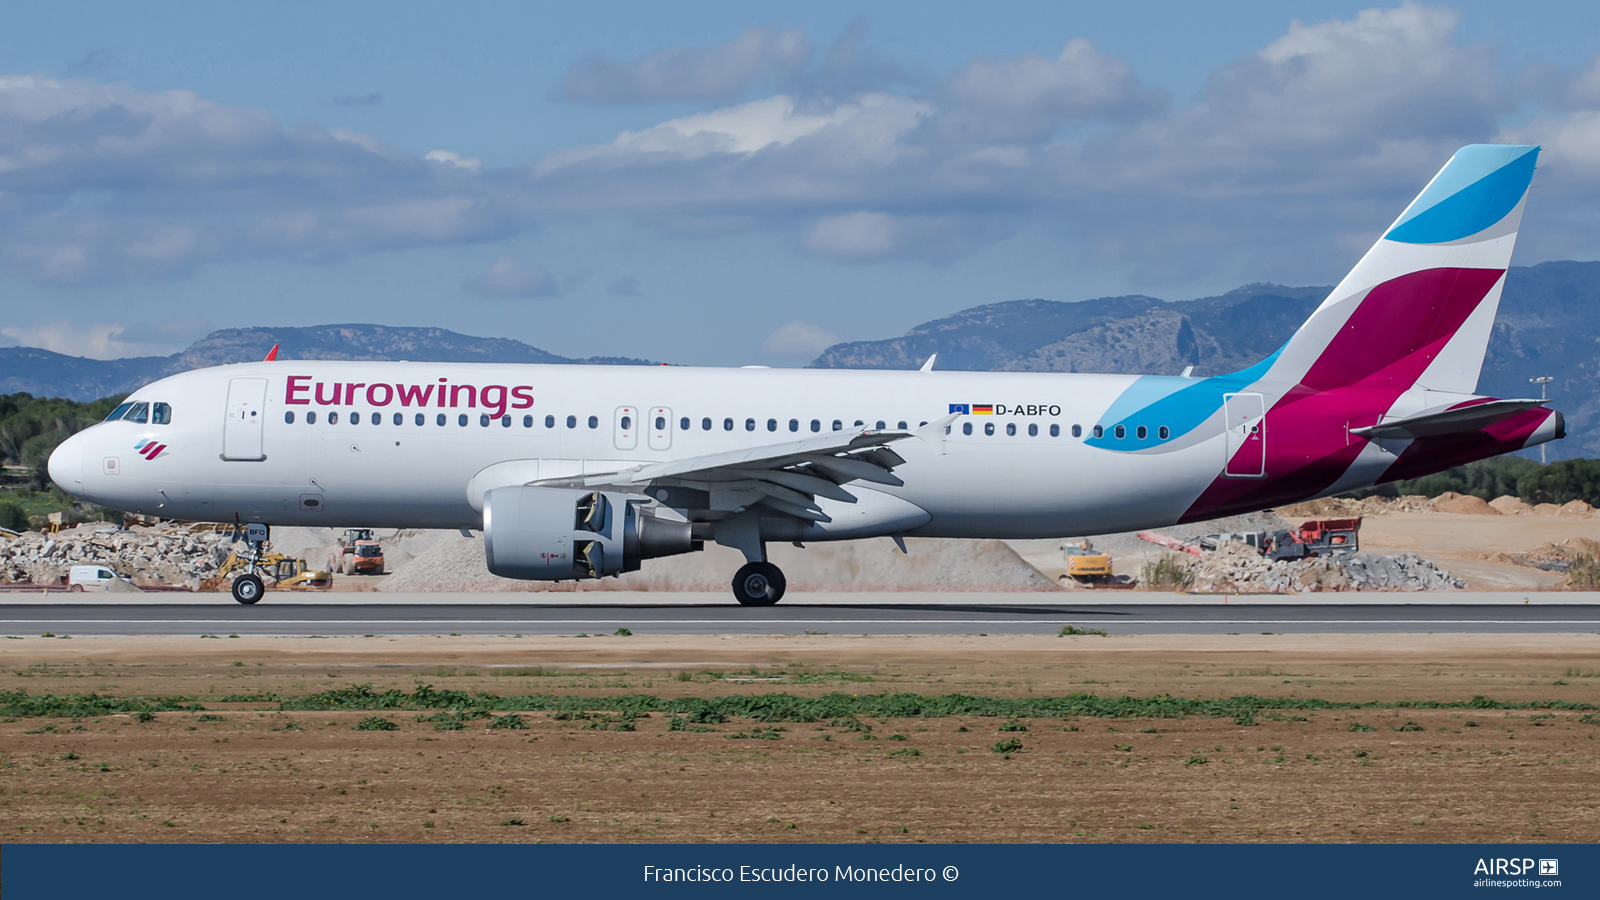 Eurowings  Airbus A320  D-ABFO